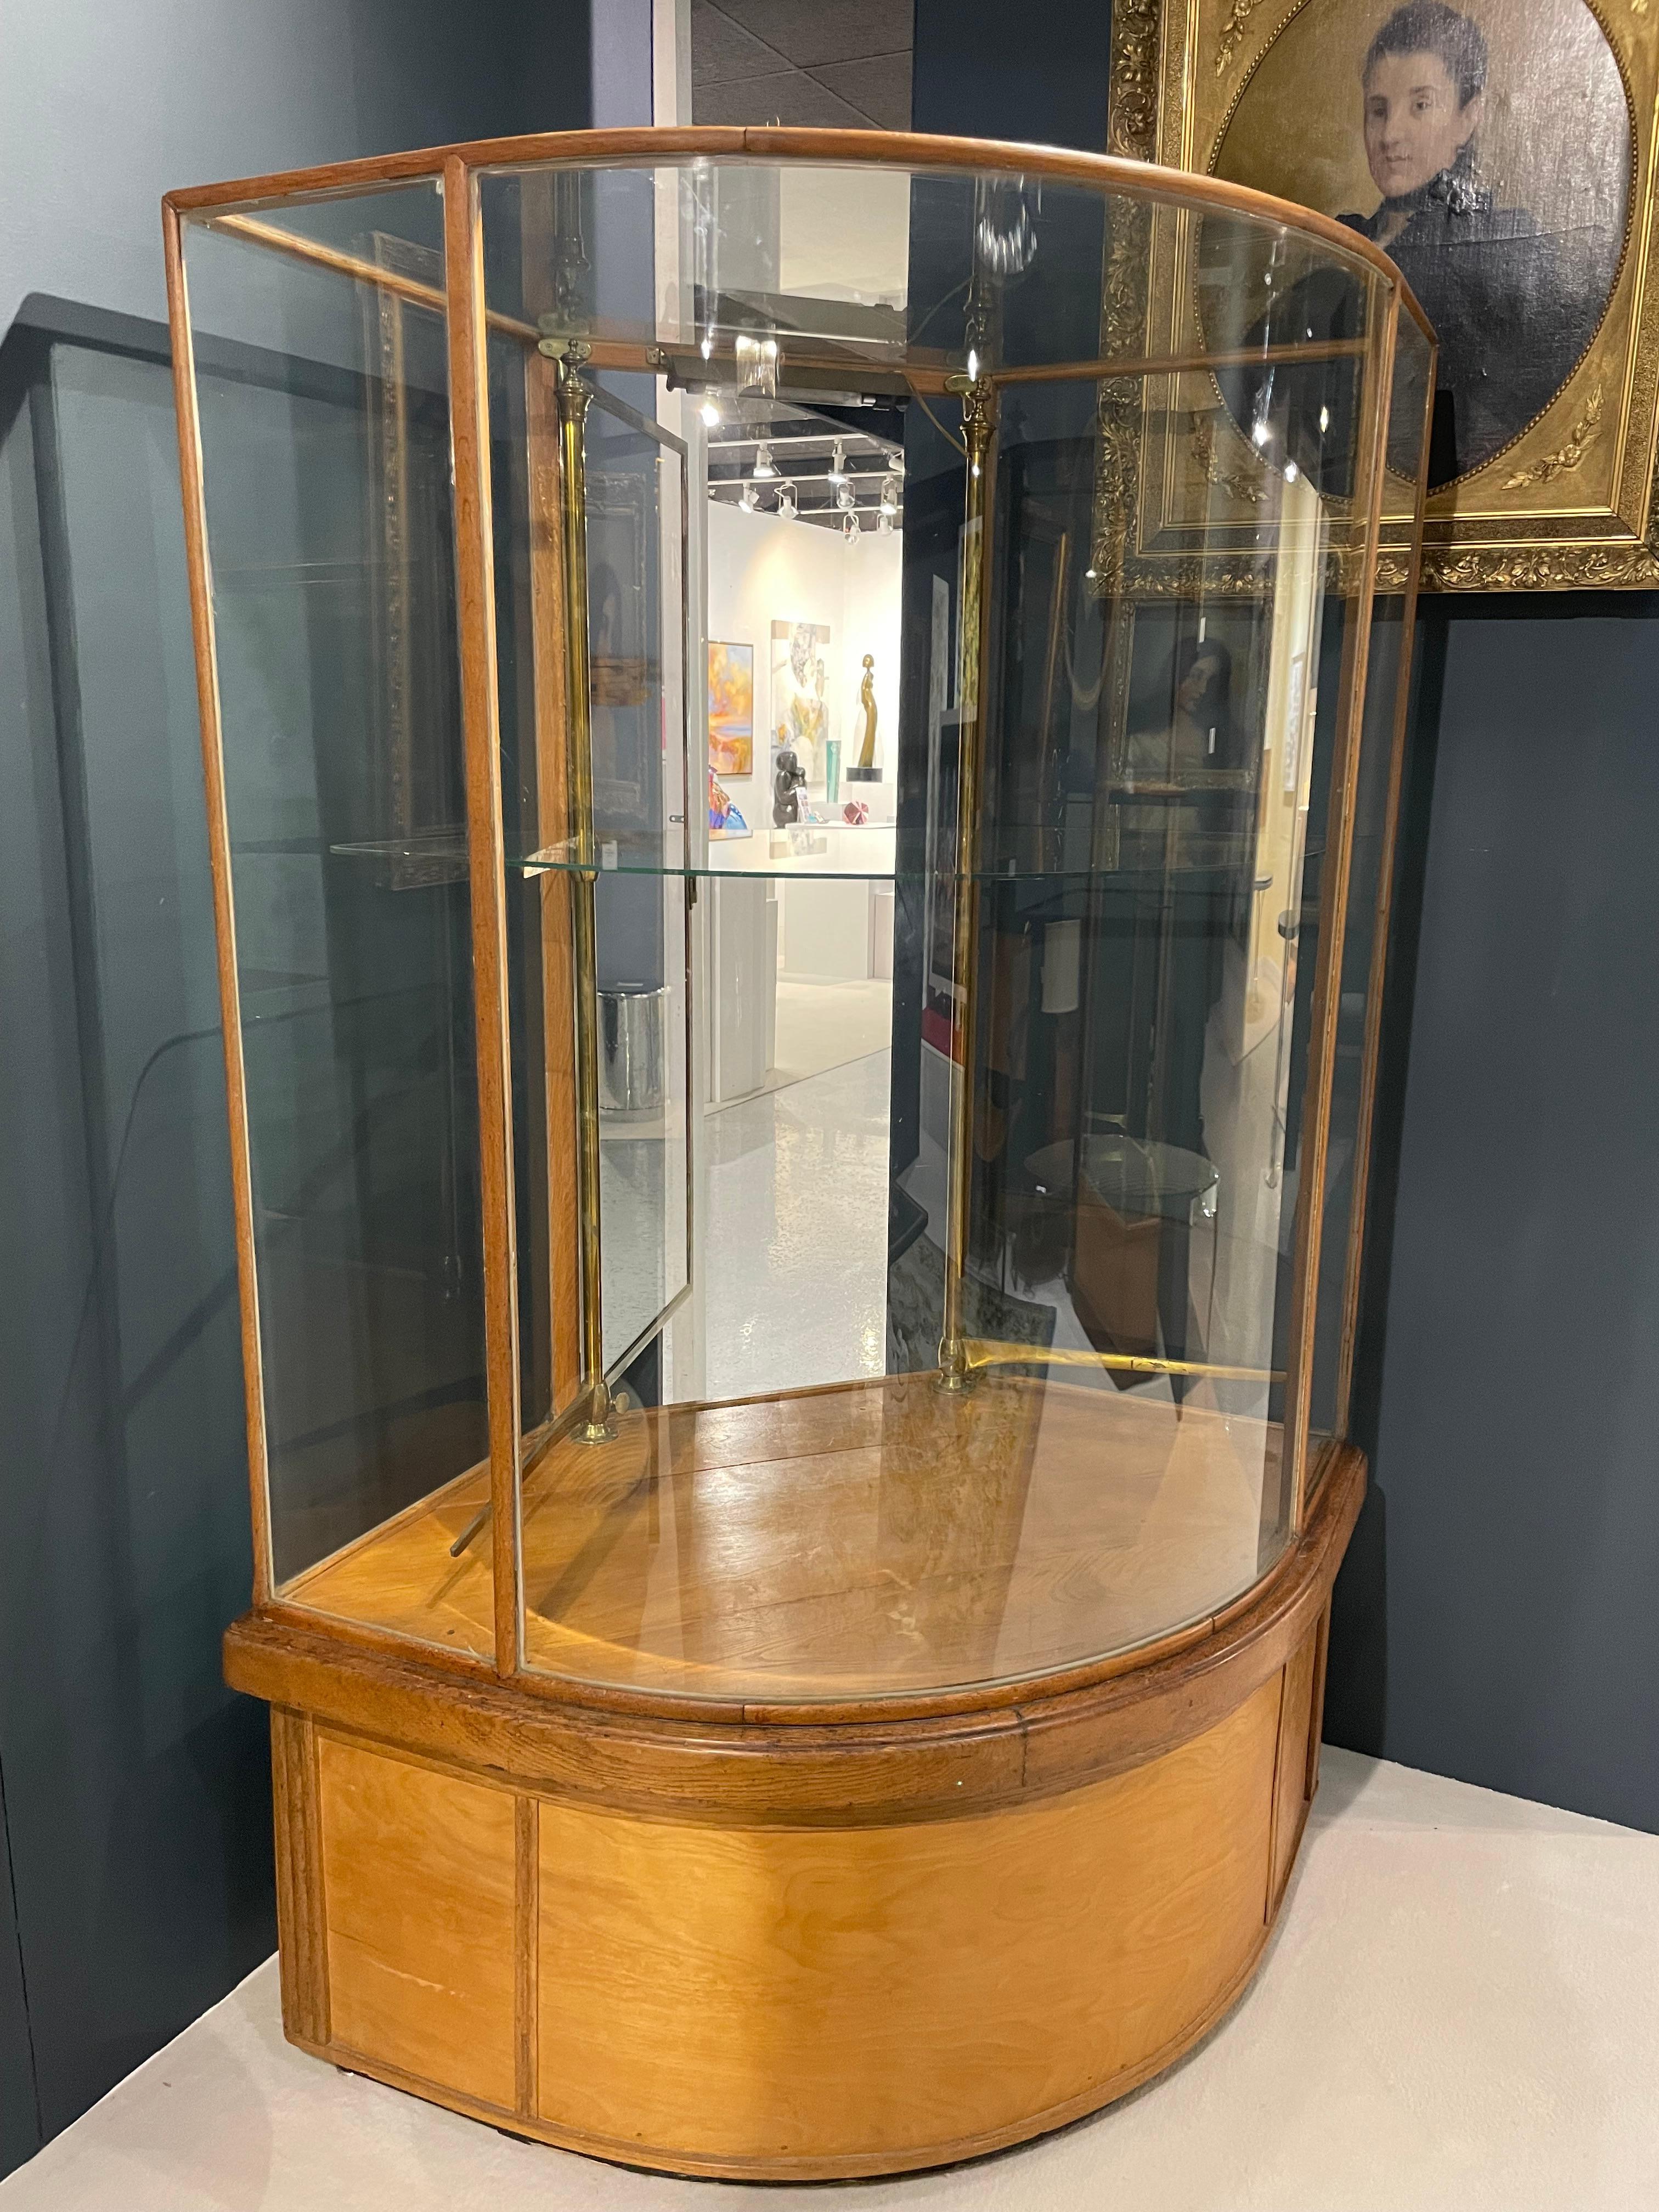 Extraordinary curved corner display case, with a shelf and support in brass. Two drawers at the back. French work, late 19th century. Splendid and rare.